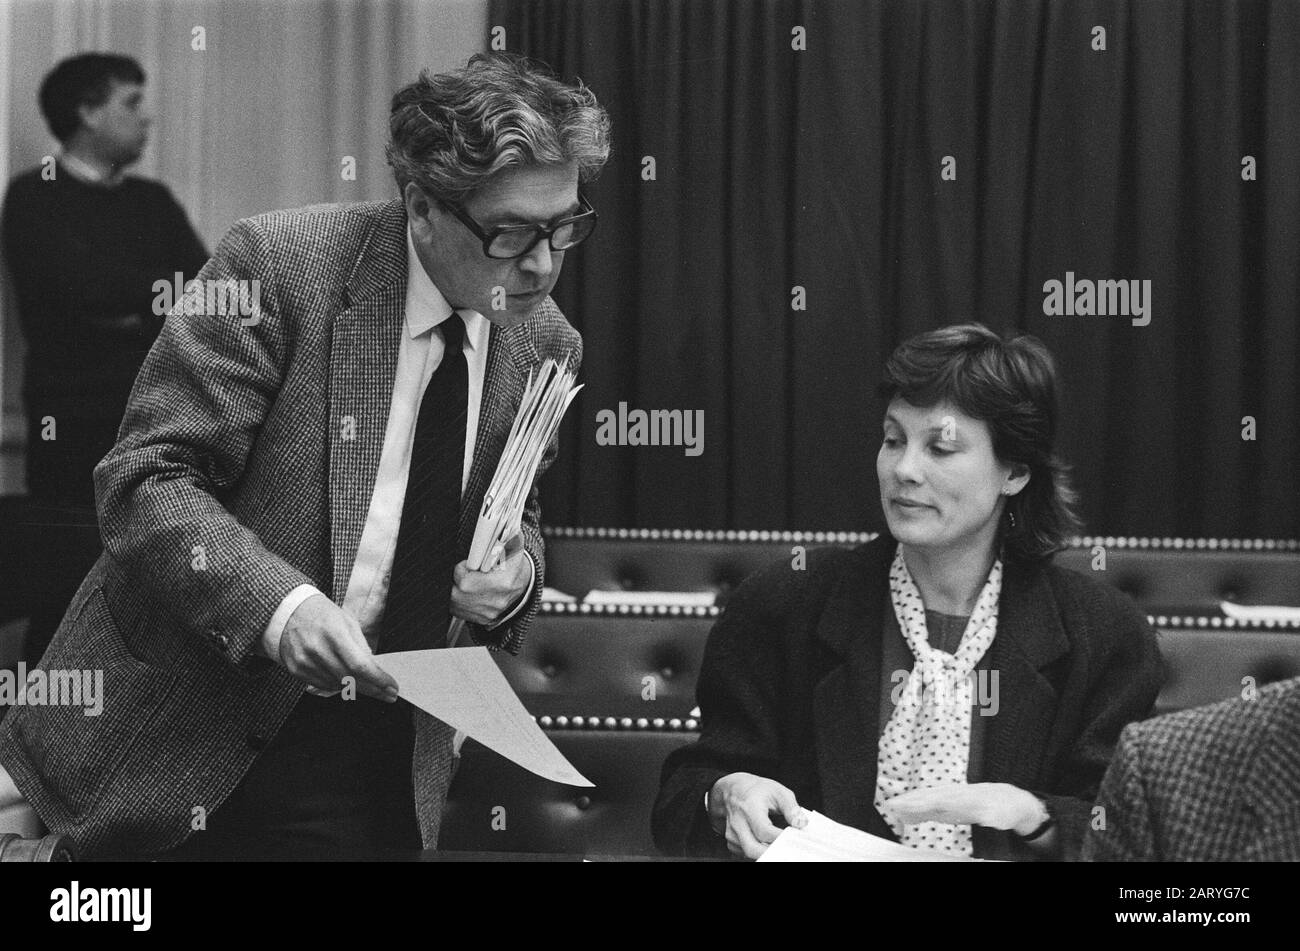 Second Chamber; debate about placement cruise missiles; PSP members Fred van der Spek and Andrée van Es Datate: November 12, 1985 Location: The Hague, Zuid-Holland Keywords: debates, cruise missiles Personal name: Es, Andrée van, Spek, Fred van der Institutionname: House Stock Photo